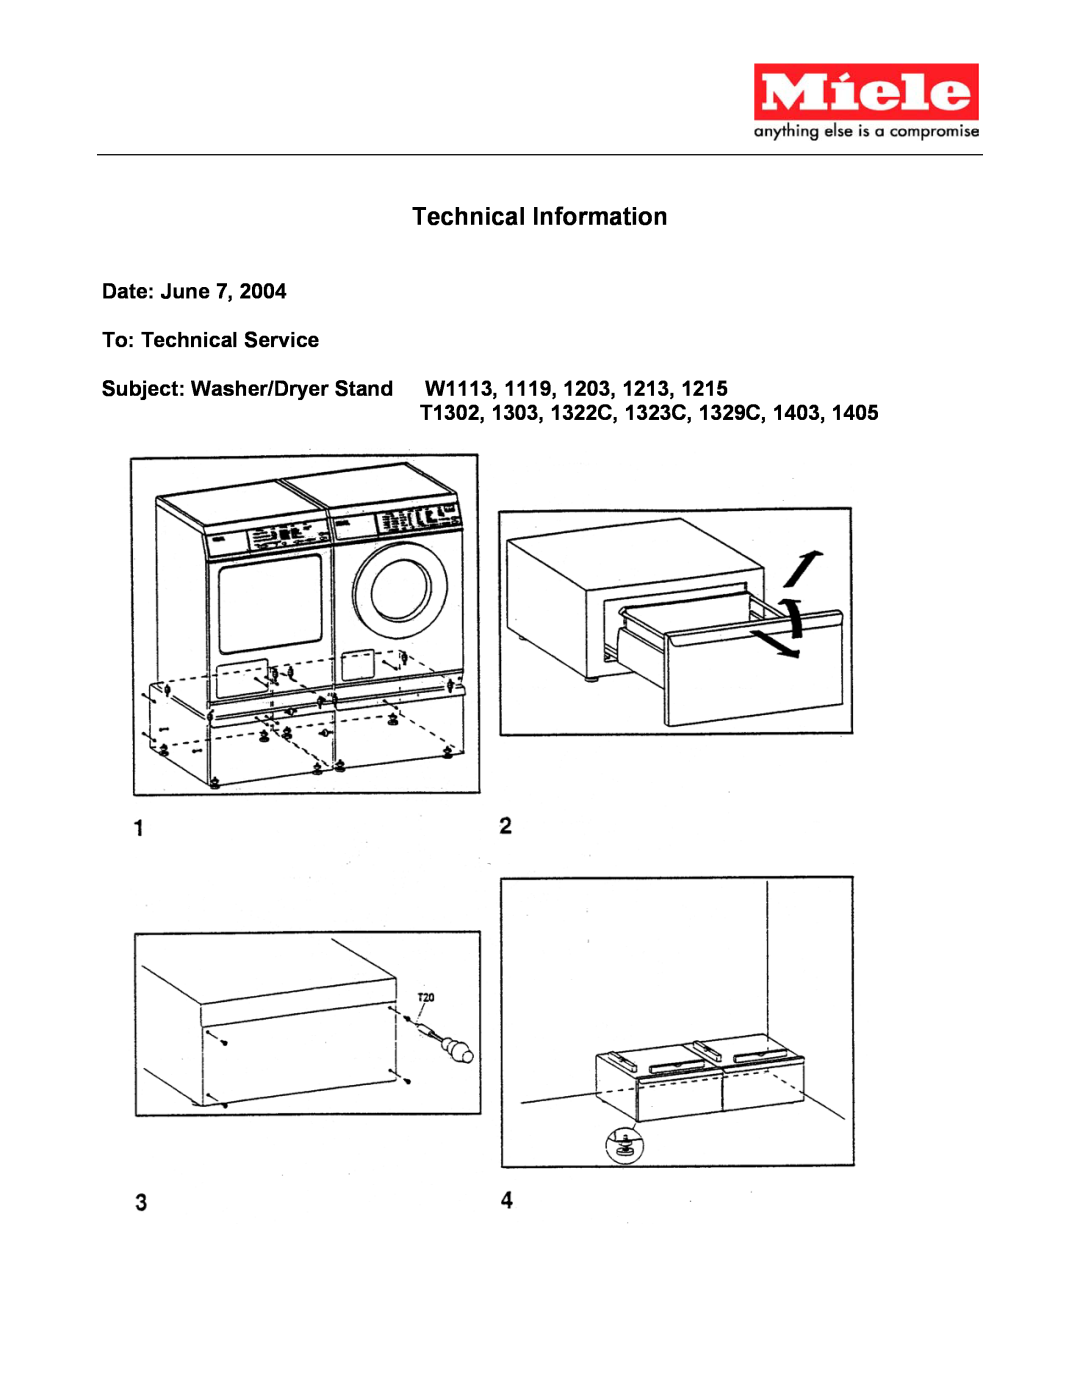 Miele T1405, W1113 manual Technical Information, Date June 7 To Technical Service, T1302, 1303, 1322C, 1323C, 1329C, 1403 